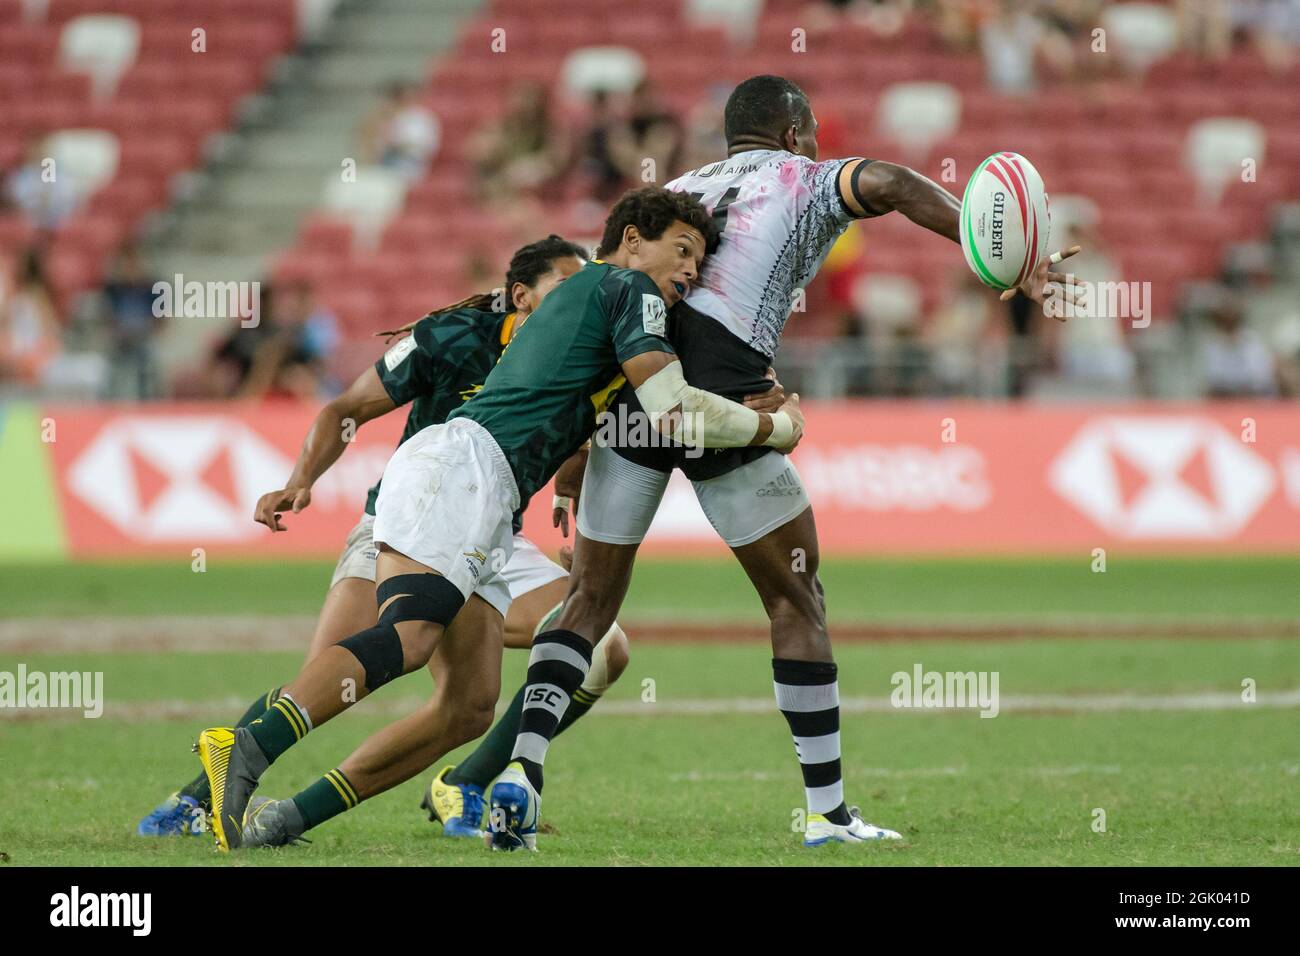 SINGAPORE-APRIL 14: South Africa 7s Team (green) plays against Fiji 7s team (white) during the Cup Final match of HSBC World Rugby Singapore Sevens on April 14, 2019 at National Stadium in Singapore Stock Photo